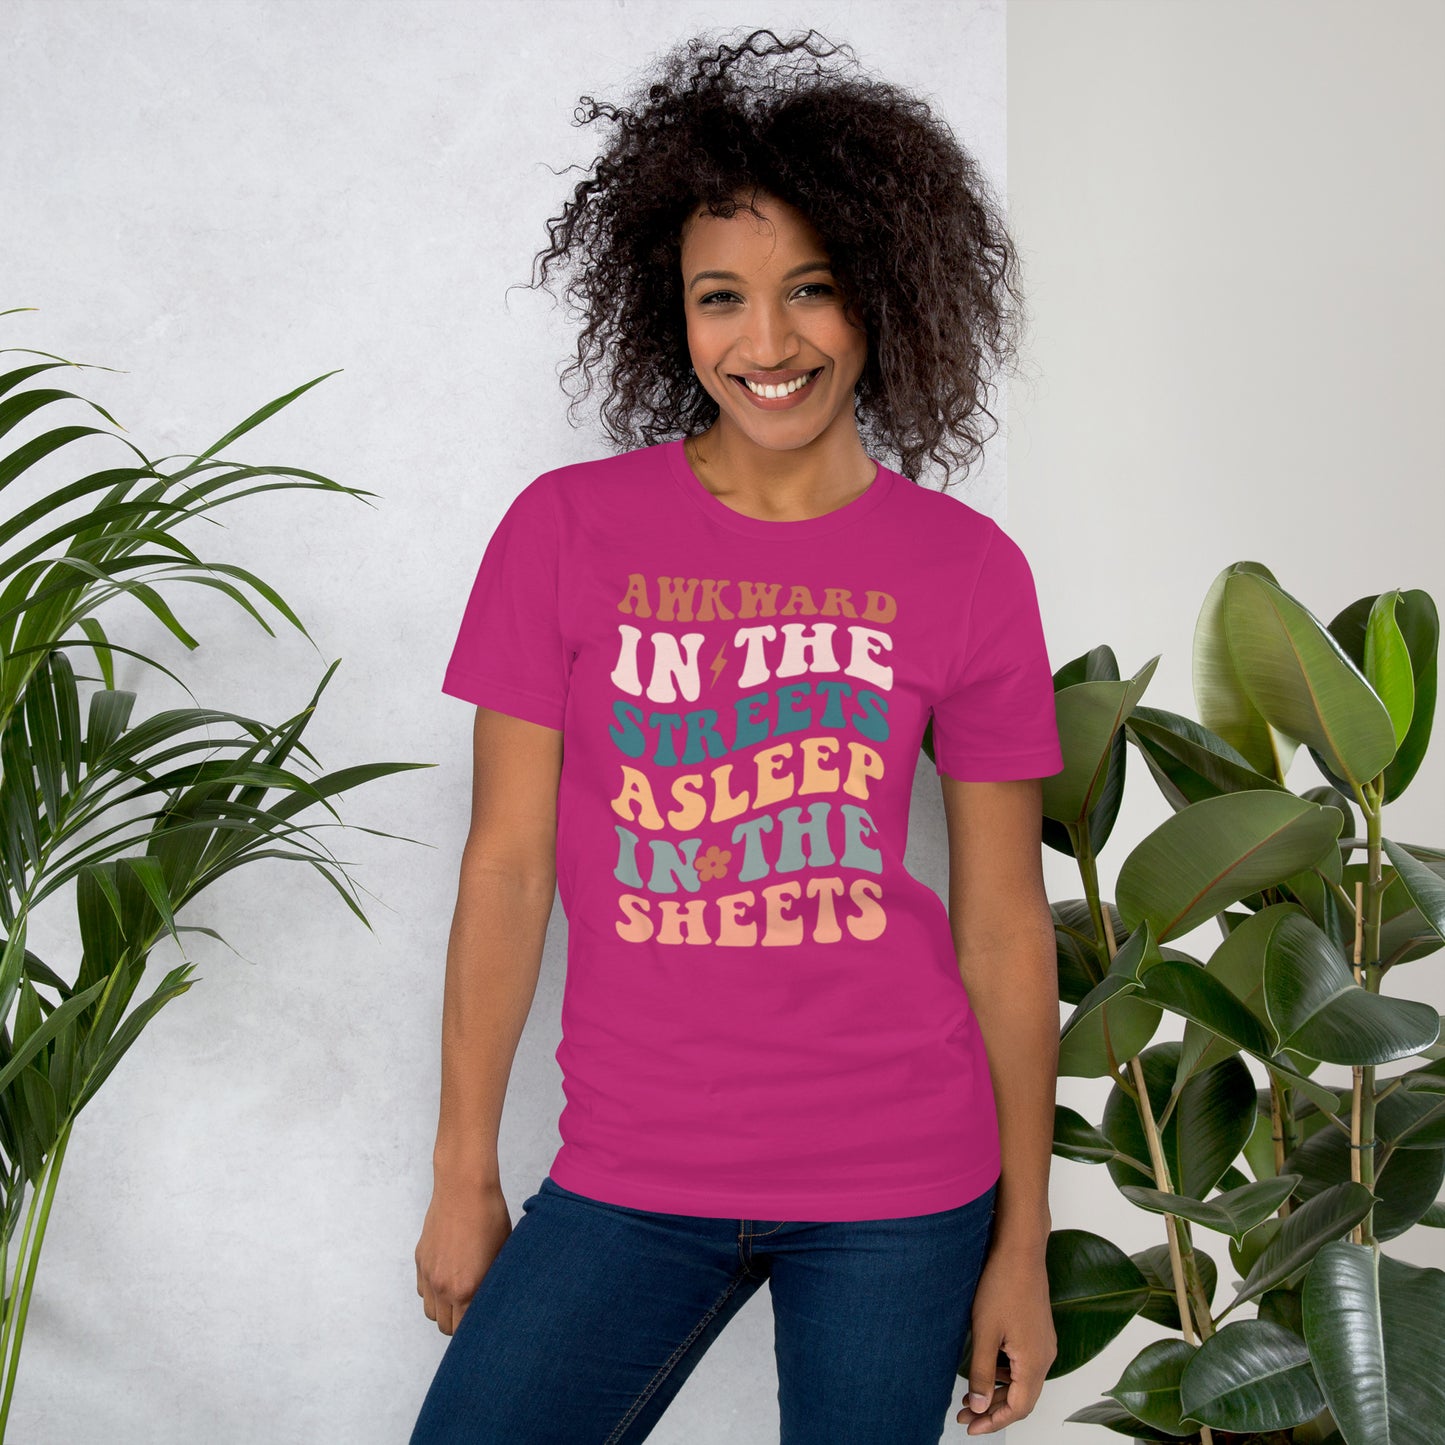 Awkward in the Streets, Asleep in the Sheets Unisex t-shirt